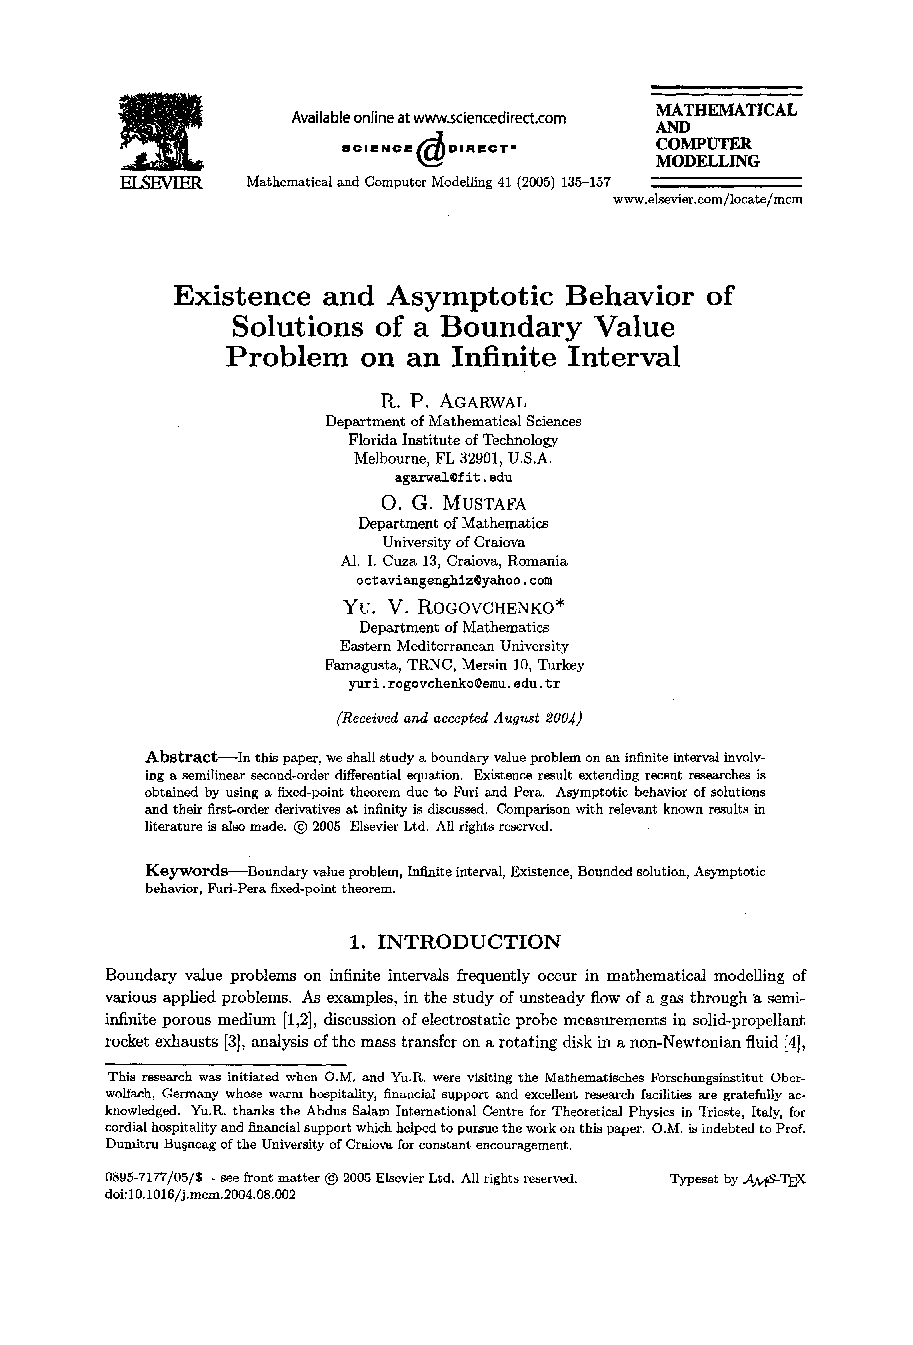 Existence and asymptotic behavior of solutions of a boundary value problem on an infinite interval